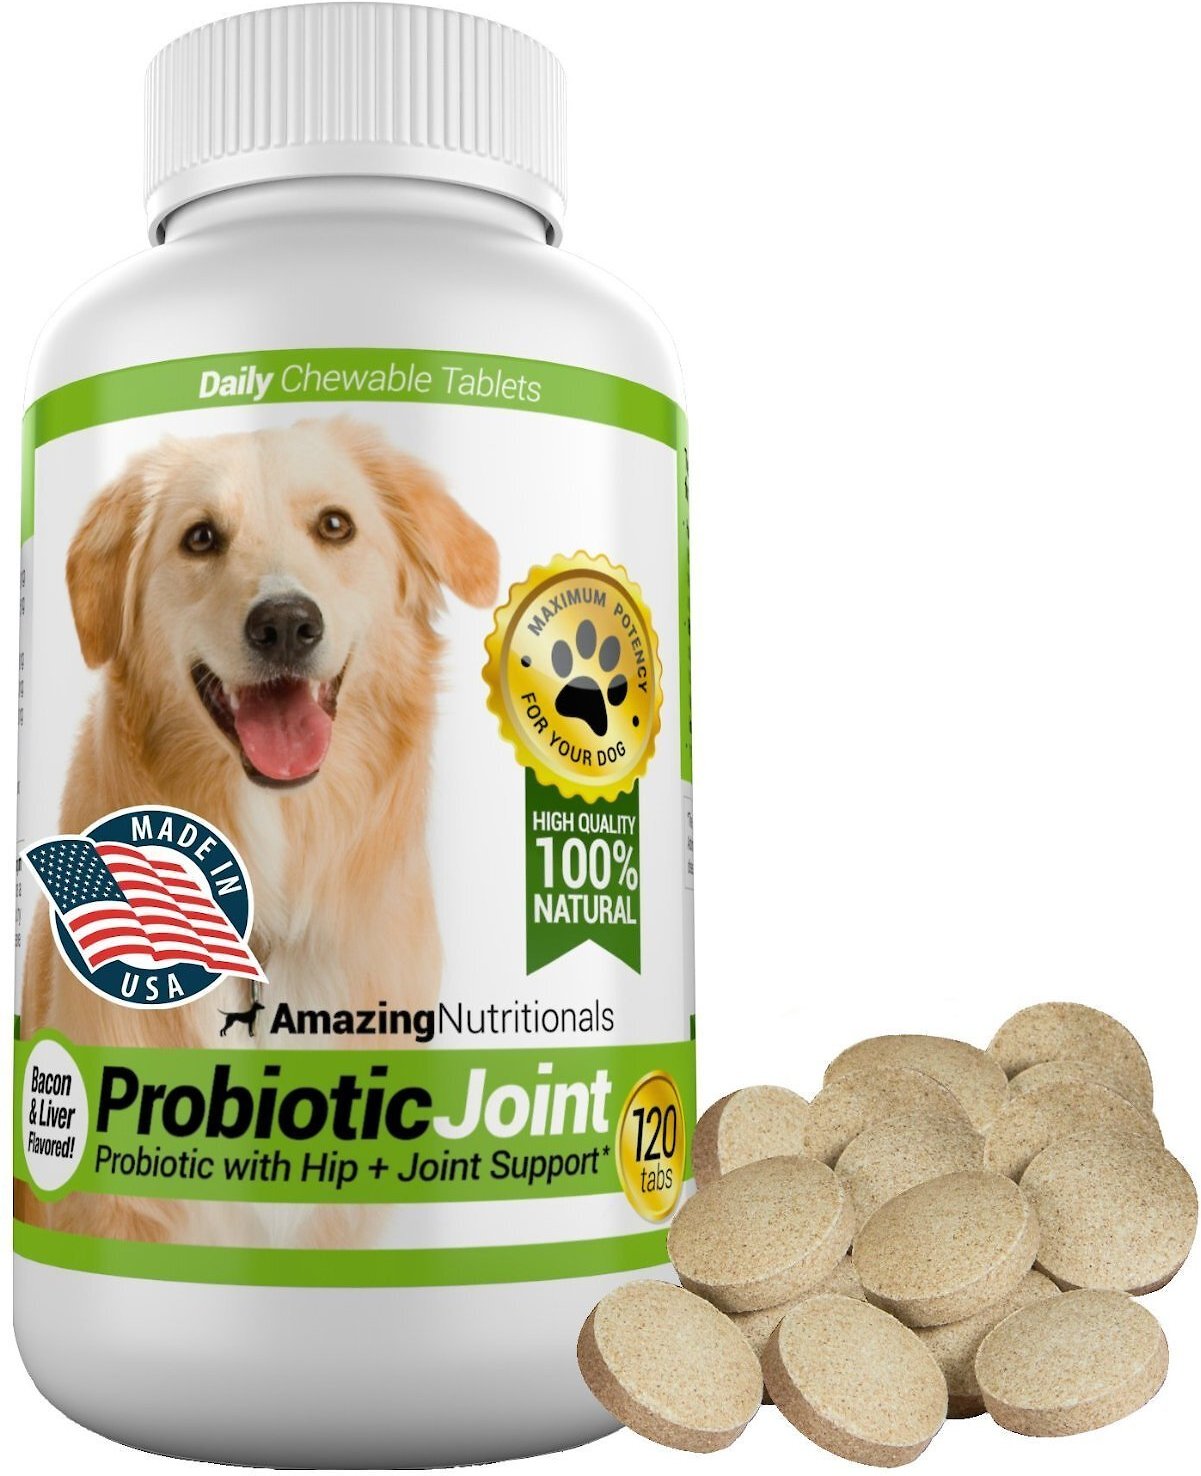 Amazing Nutritionals Probiotic Joint & Hip Support